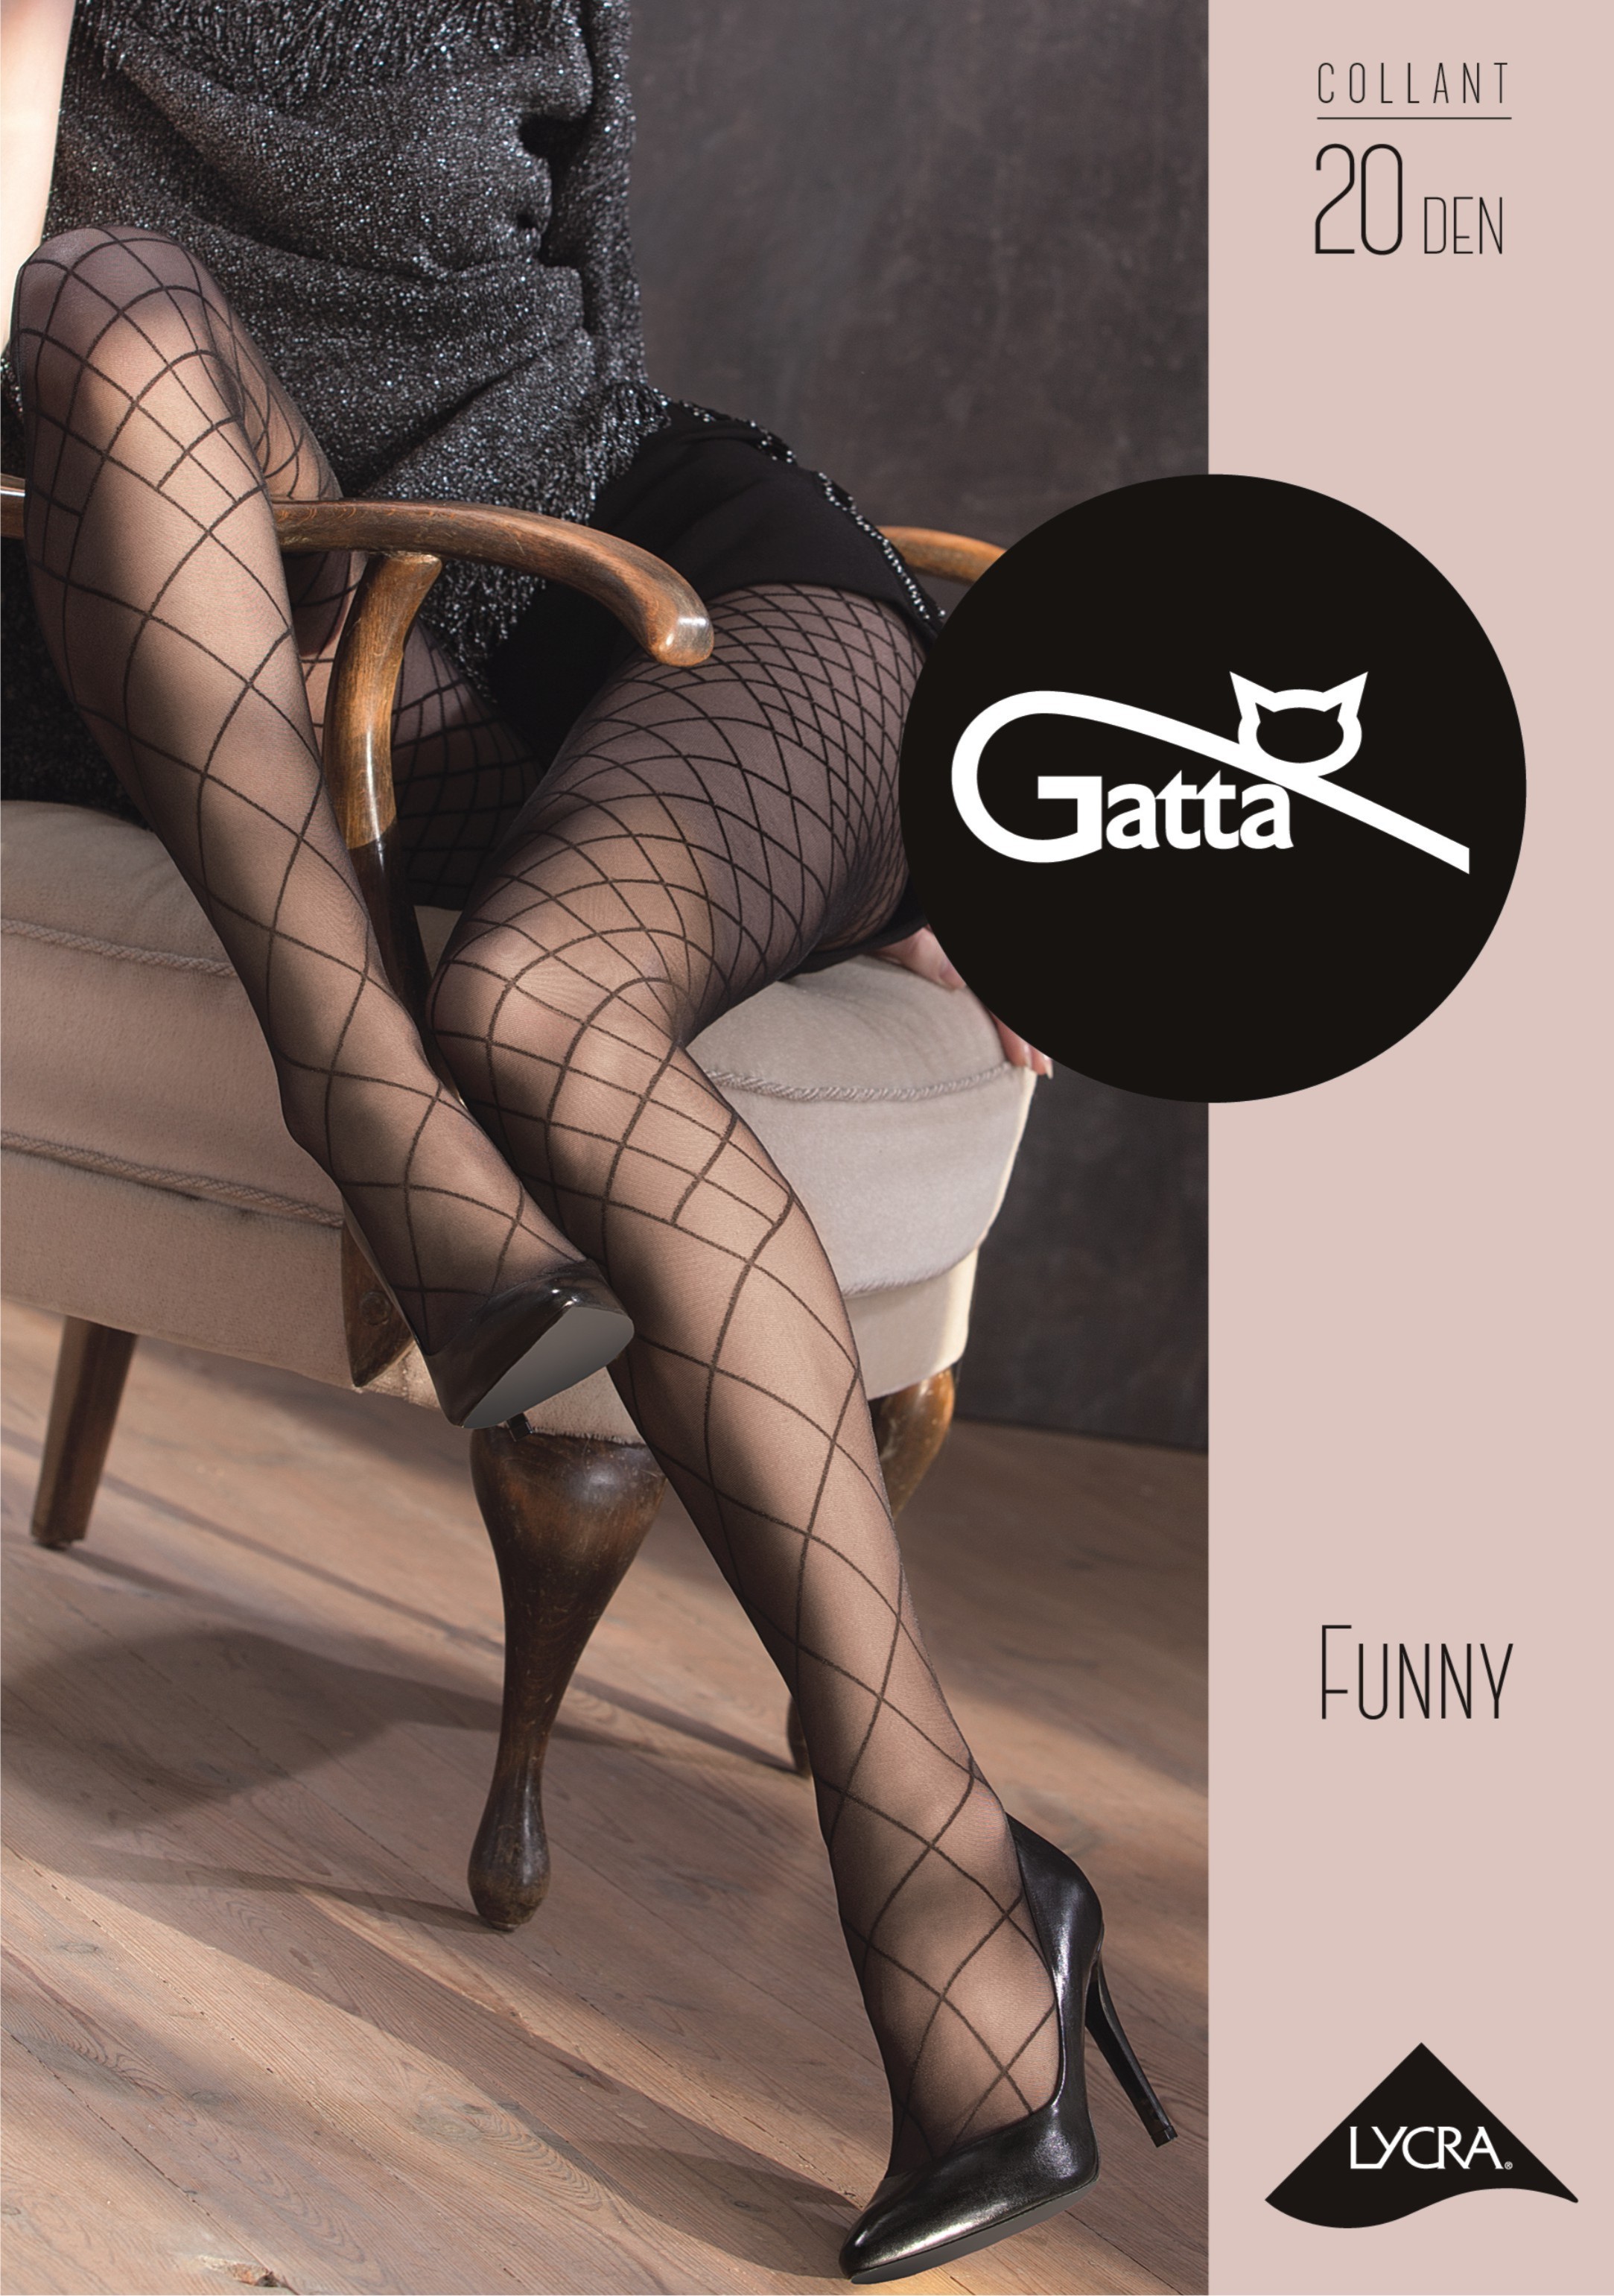 Gatta Sheer Shaping Tights Pantyhose - 20 denier - BODY SHAPER : :  Clothing, Shoes & Accessories